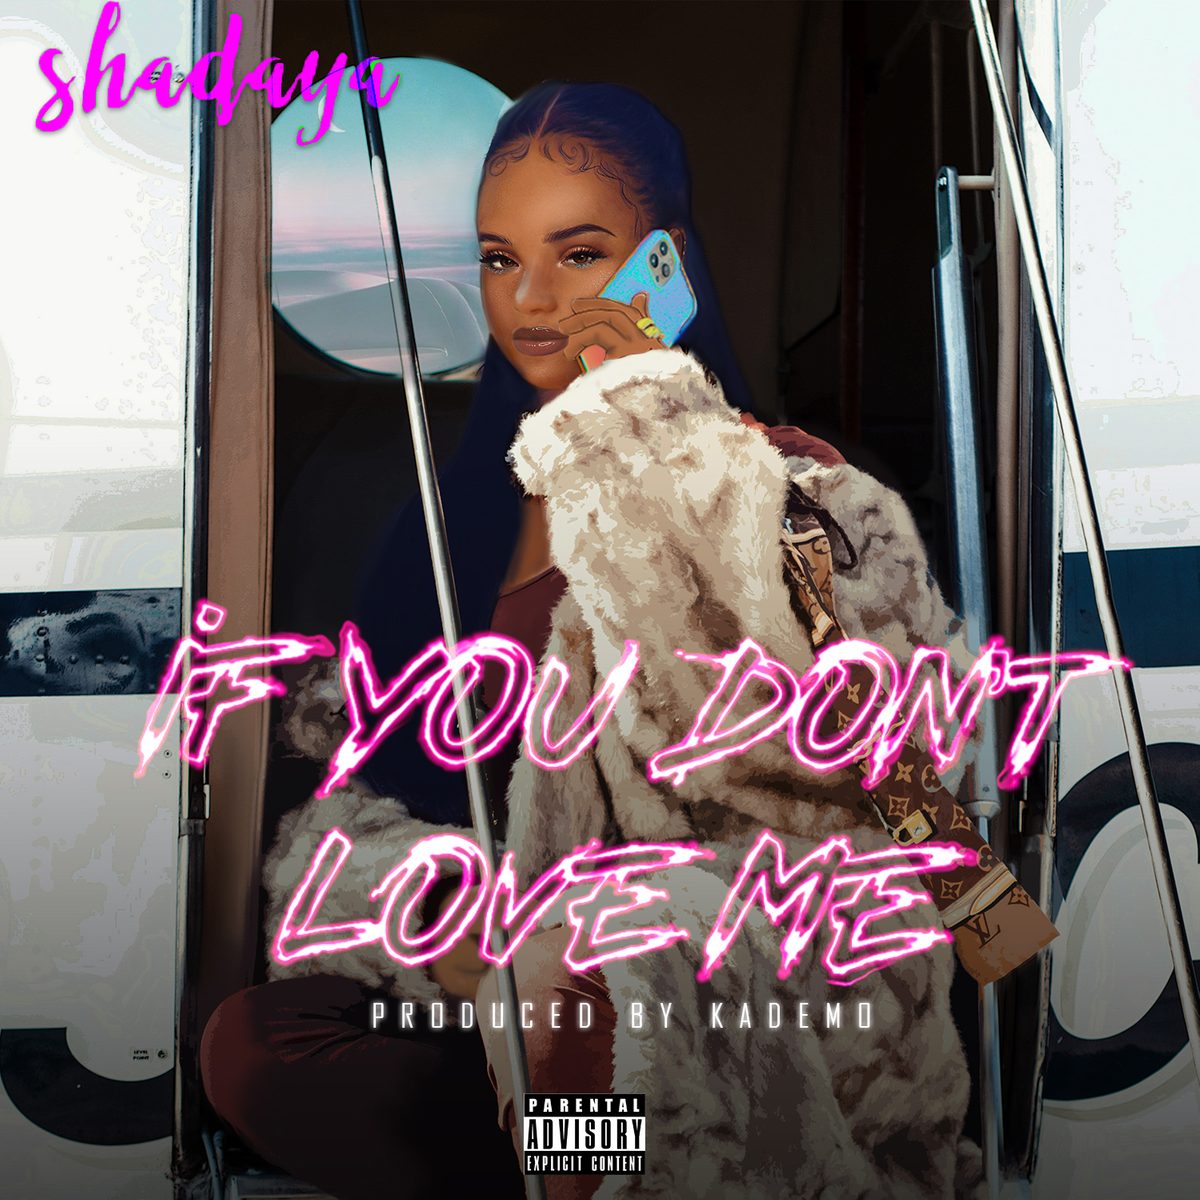 Shadaya - “If You Don’t Love Me'' Mp3 DOWNLOAD Mp3